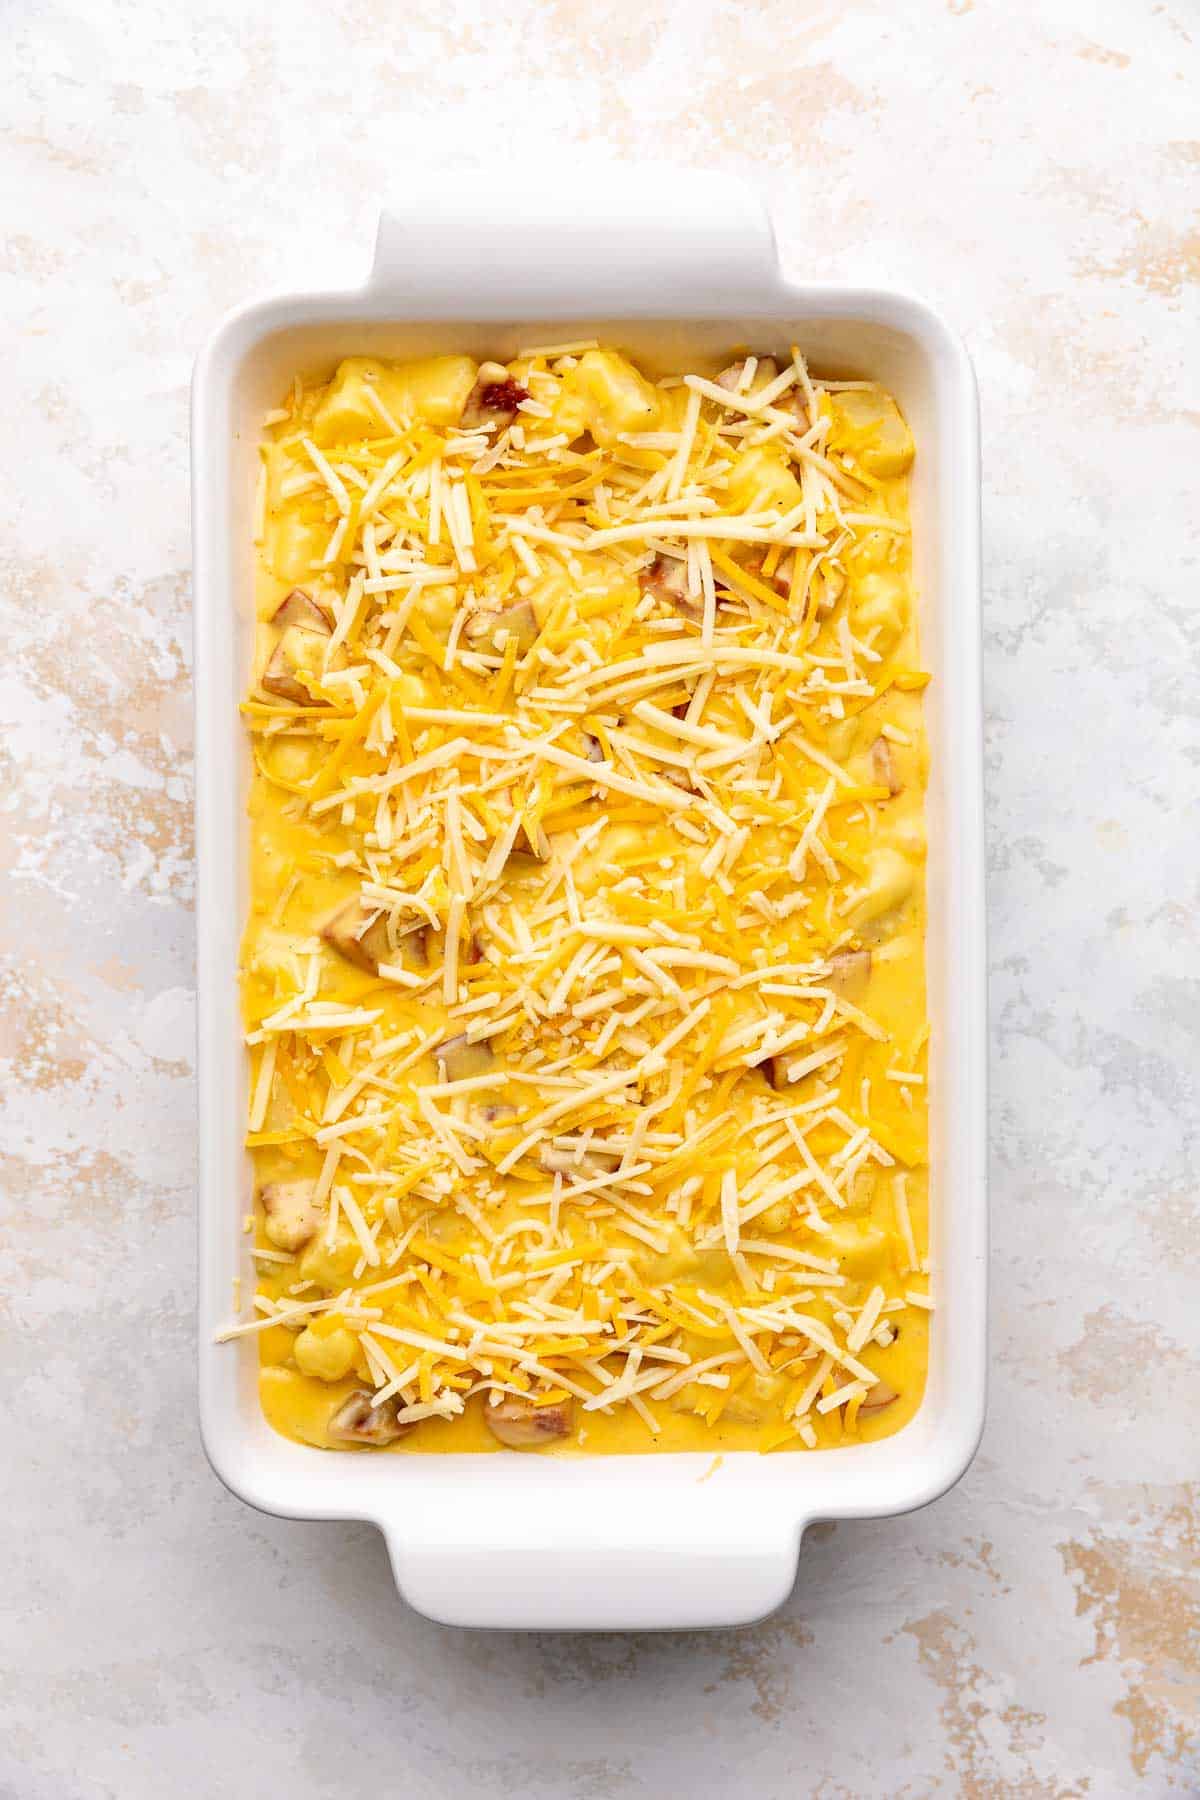 Shredded cheese sprinkled over cheese, sausage and potatoes.